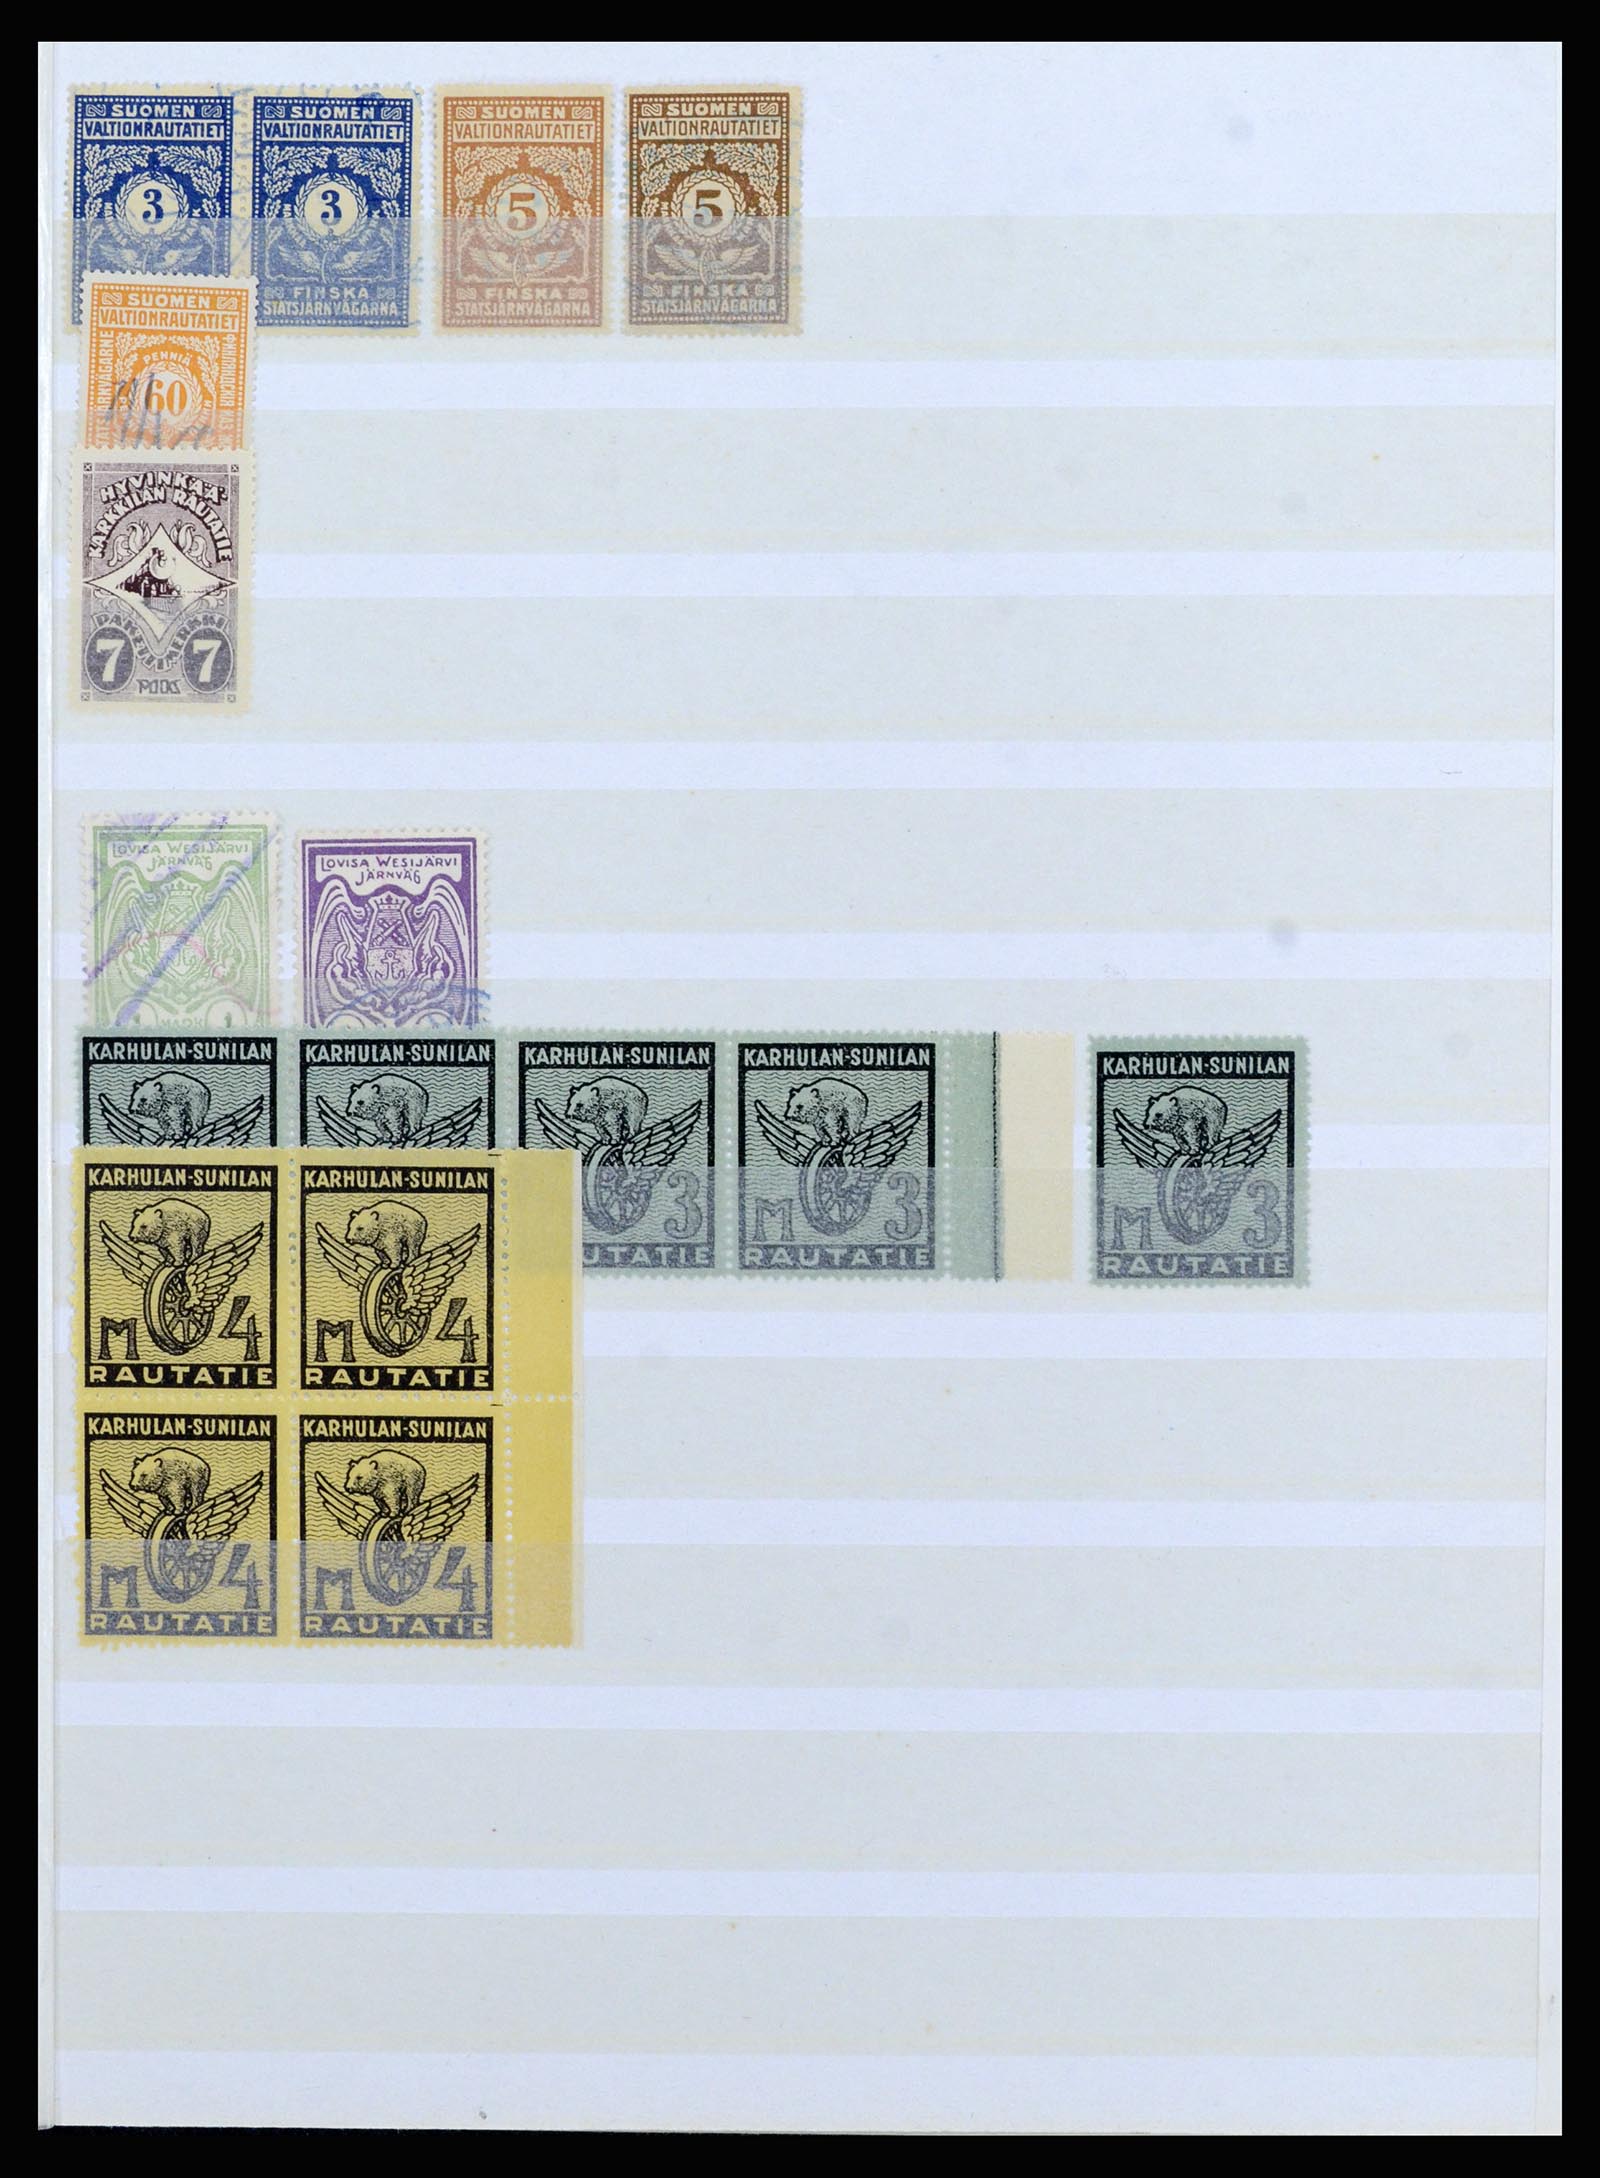 36981 034 - Stamp collection 36981 Scandinavia railroadstamps.